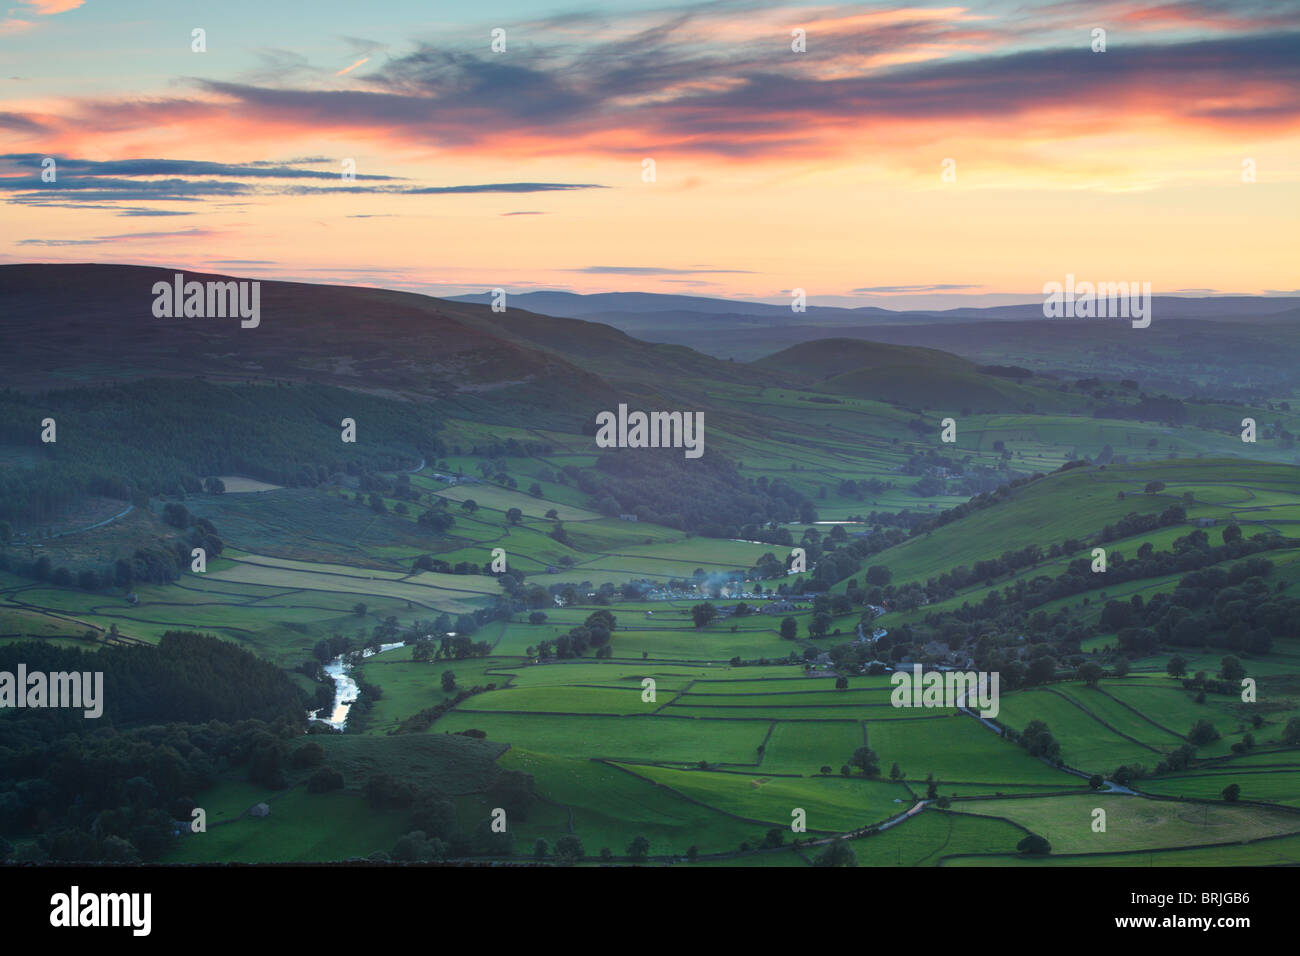 Twilight view over Wharfedale and Appletreewick as seen from Barden Fell in the Yorkshire Dales of England Stock Photo